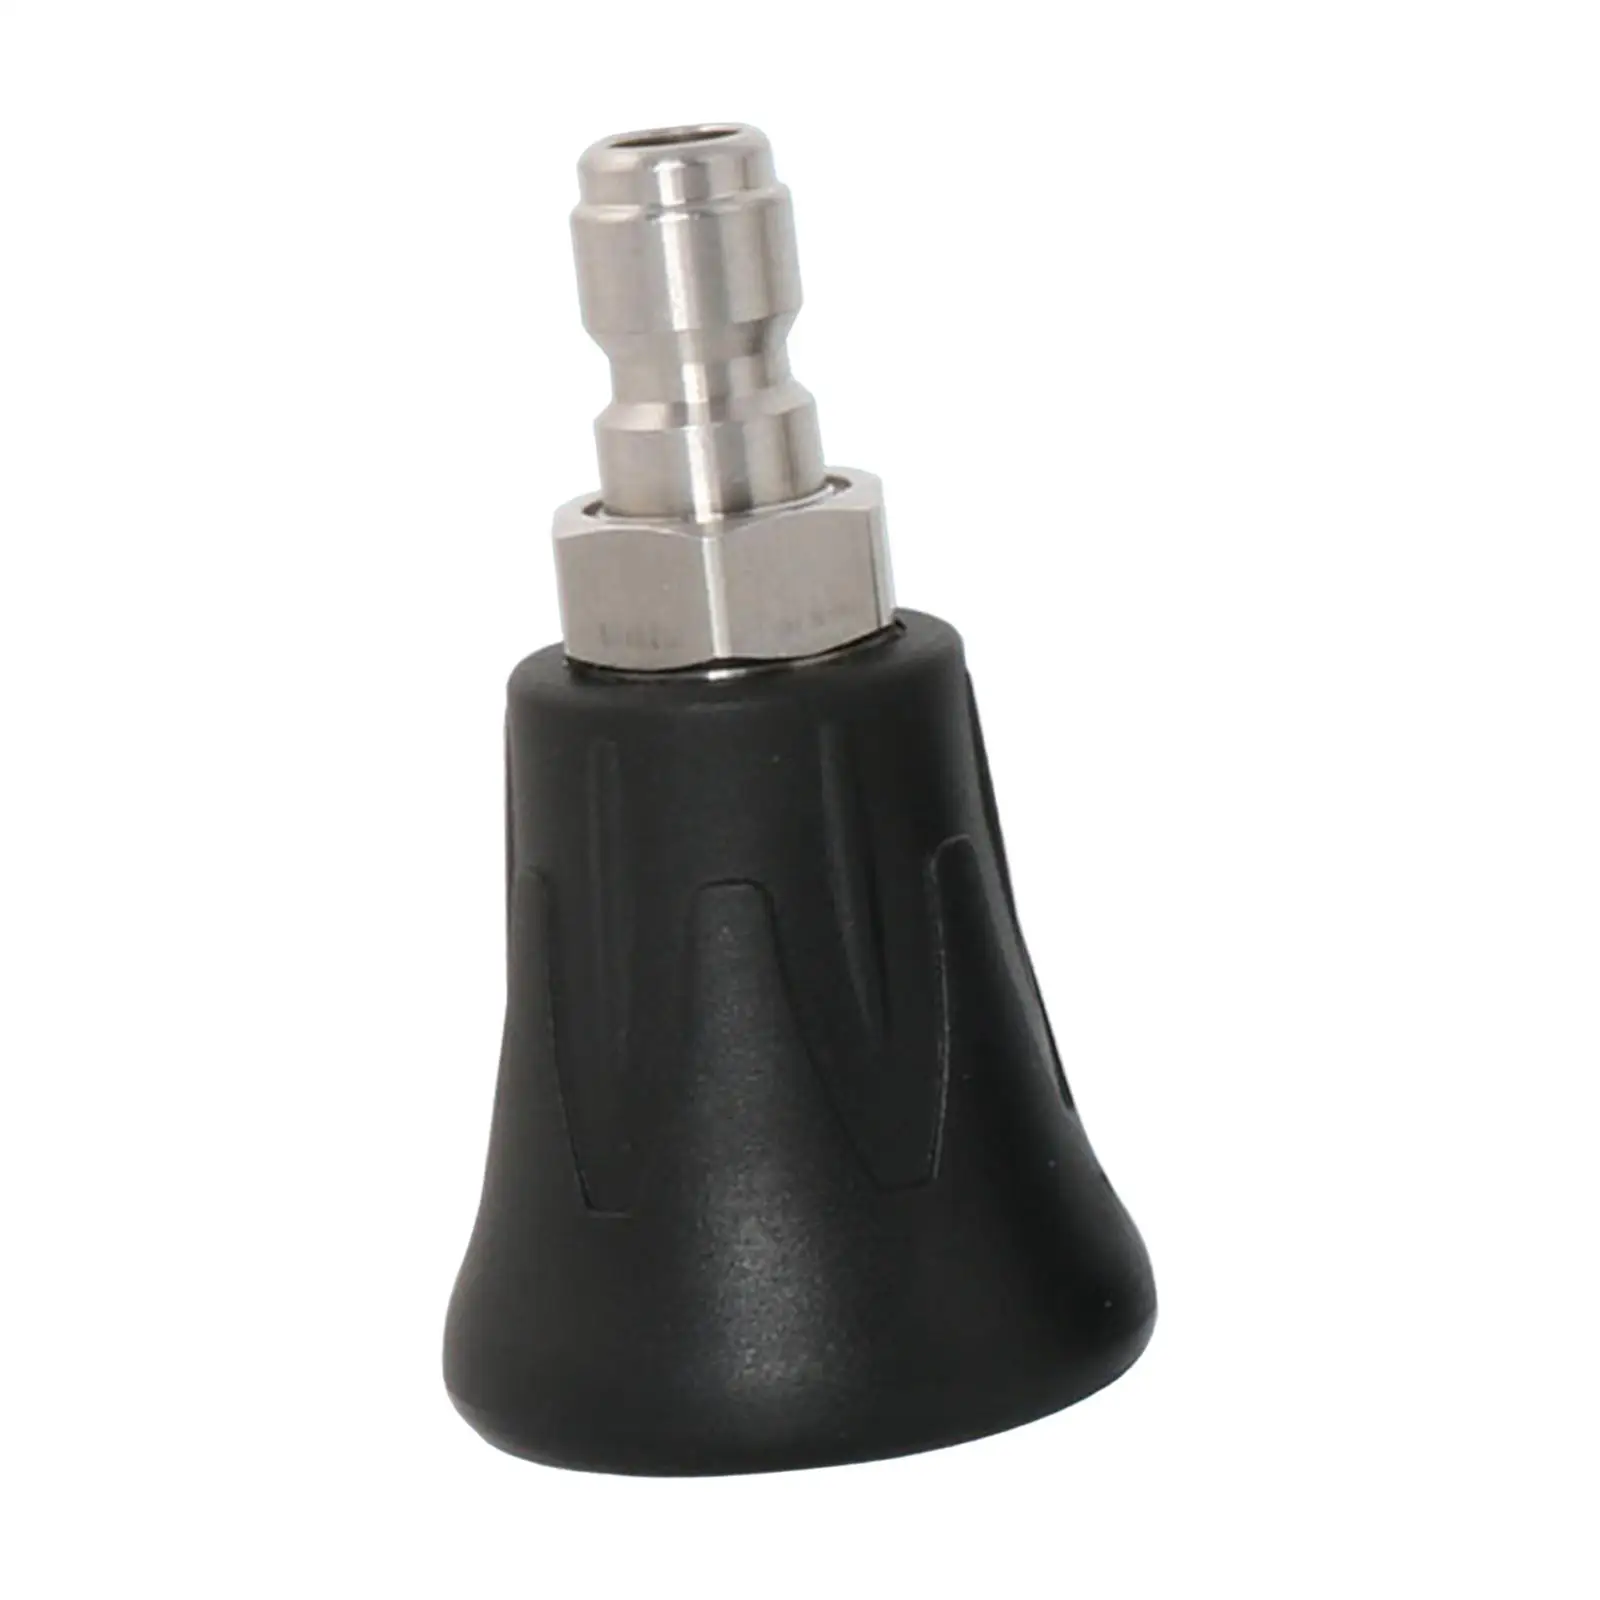 1/4 Pressure Washer Nozzle Tips High Pressure Water Nozzle Hard Rubber Sleeve Fan Nozzle Stainless Steel Quick Plug for Lawns